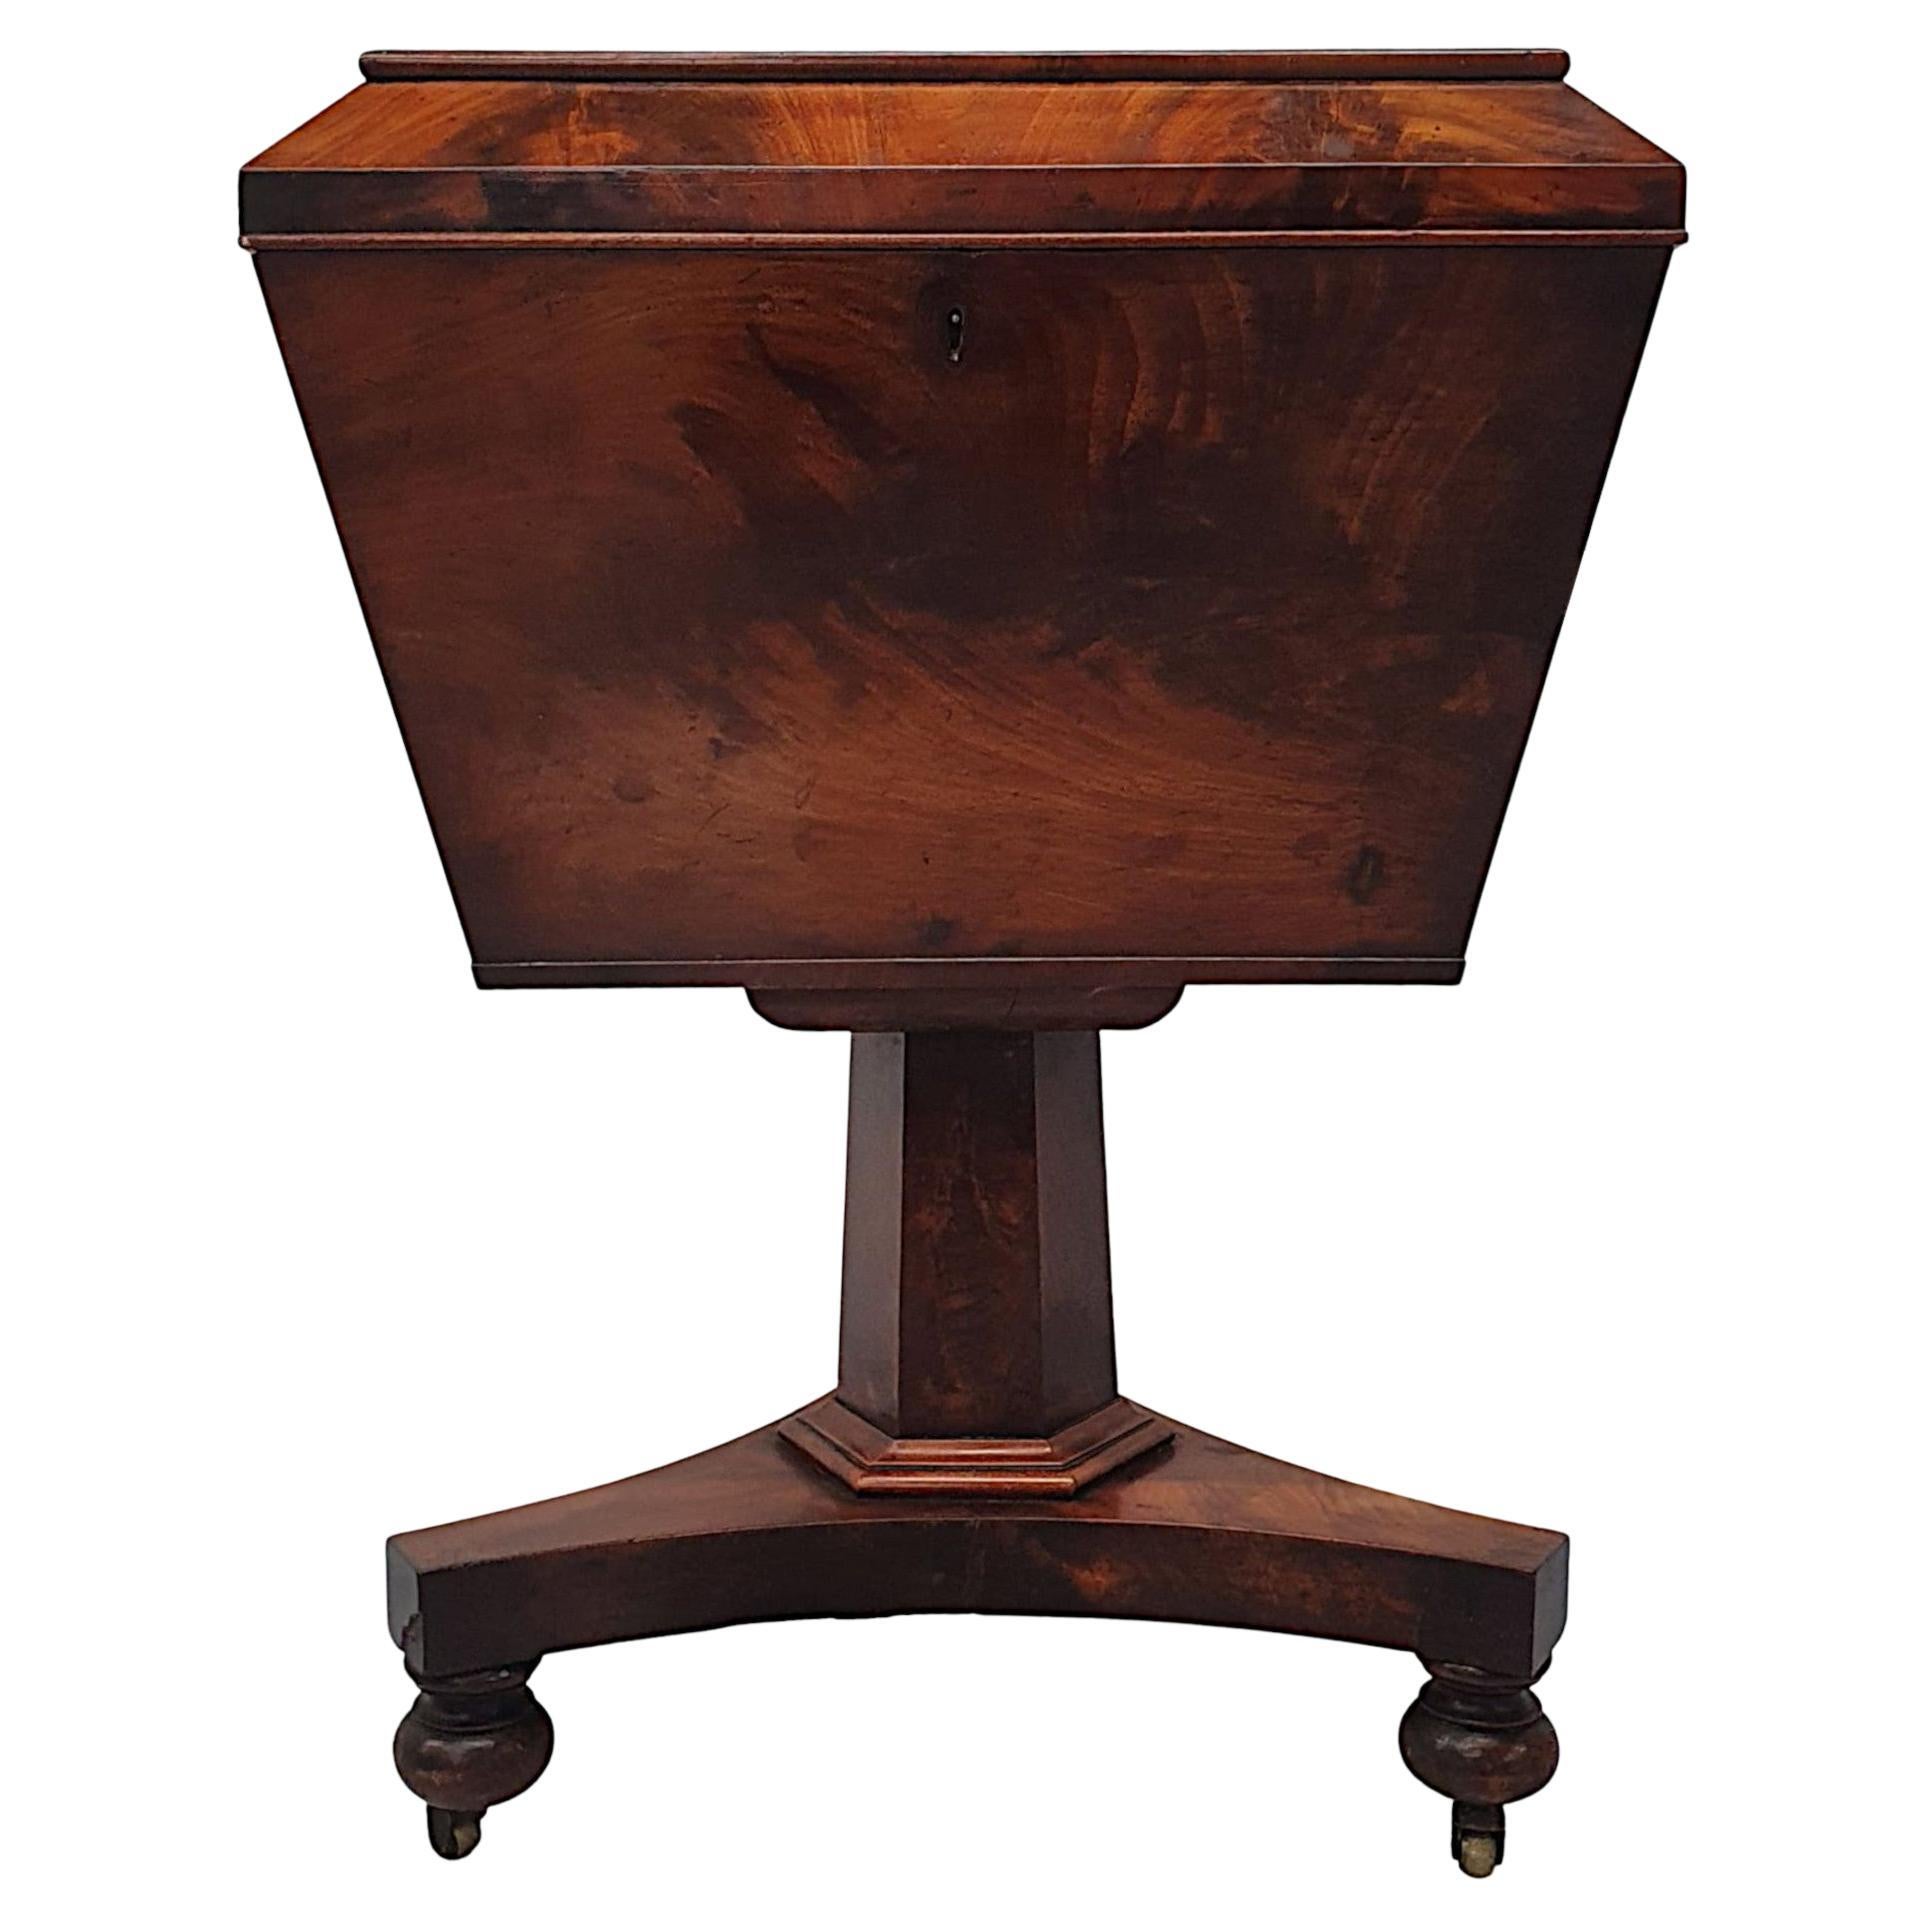 Very Fine Early 19th Century Flame Mahogany Cellerette